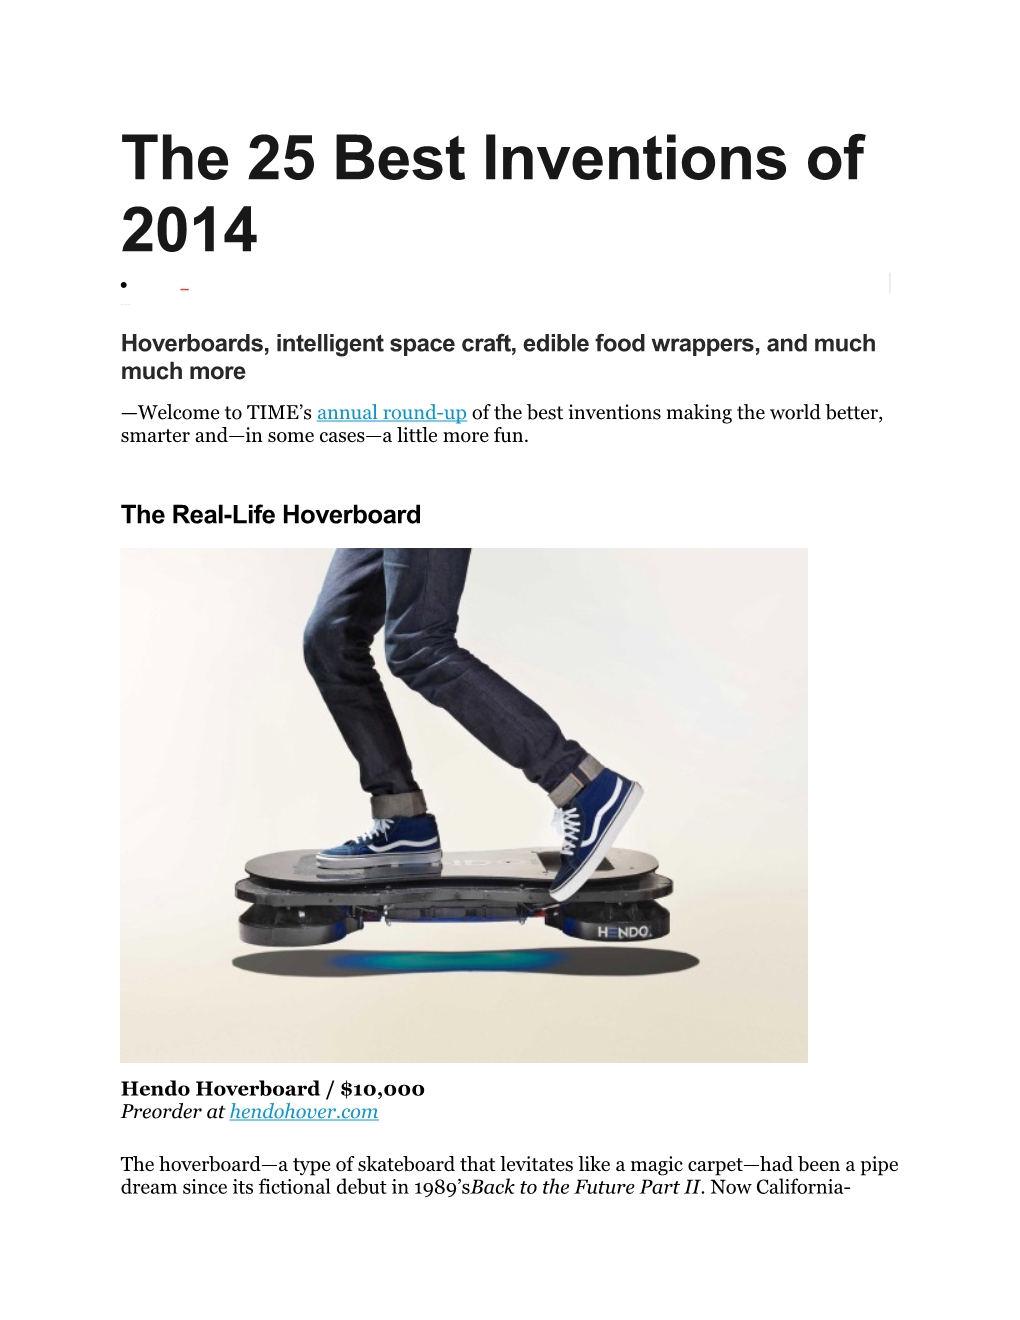 Hoverboards, Intelligent Space Craft, Edible Food Wrappers, and Much Much More